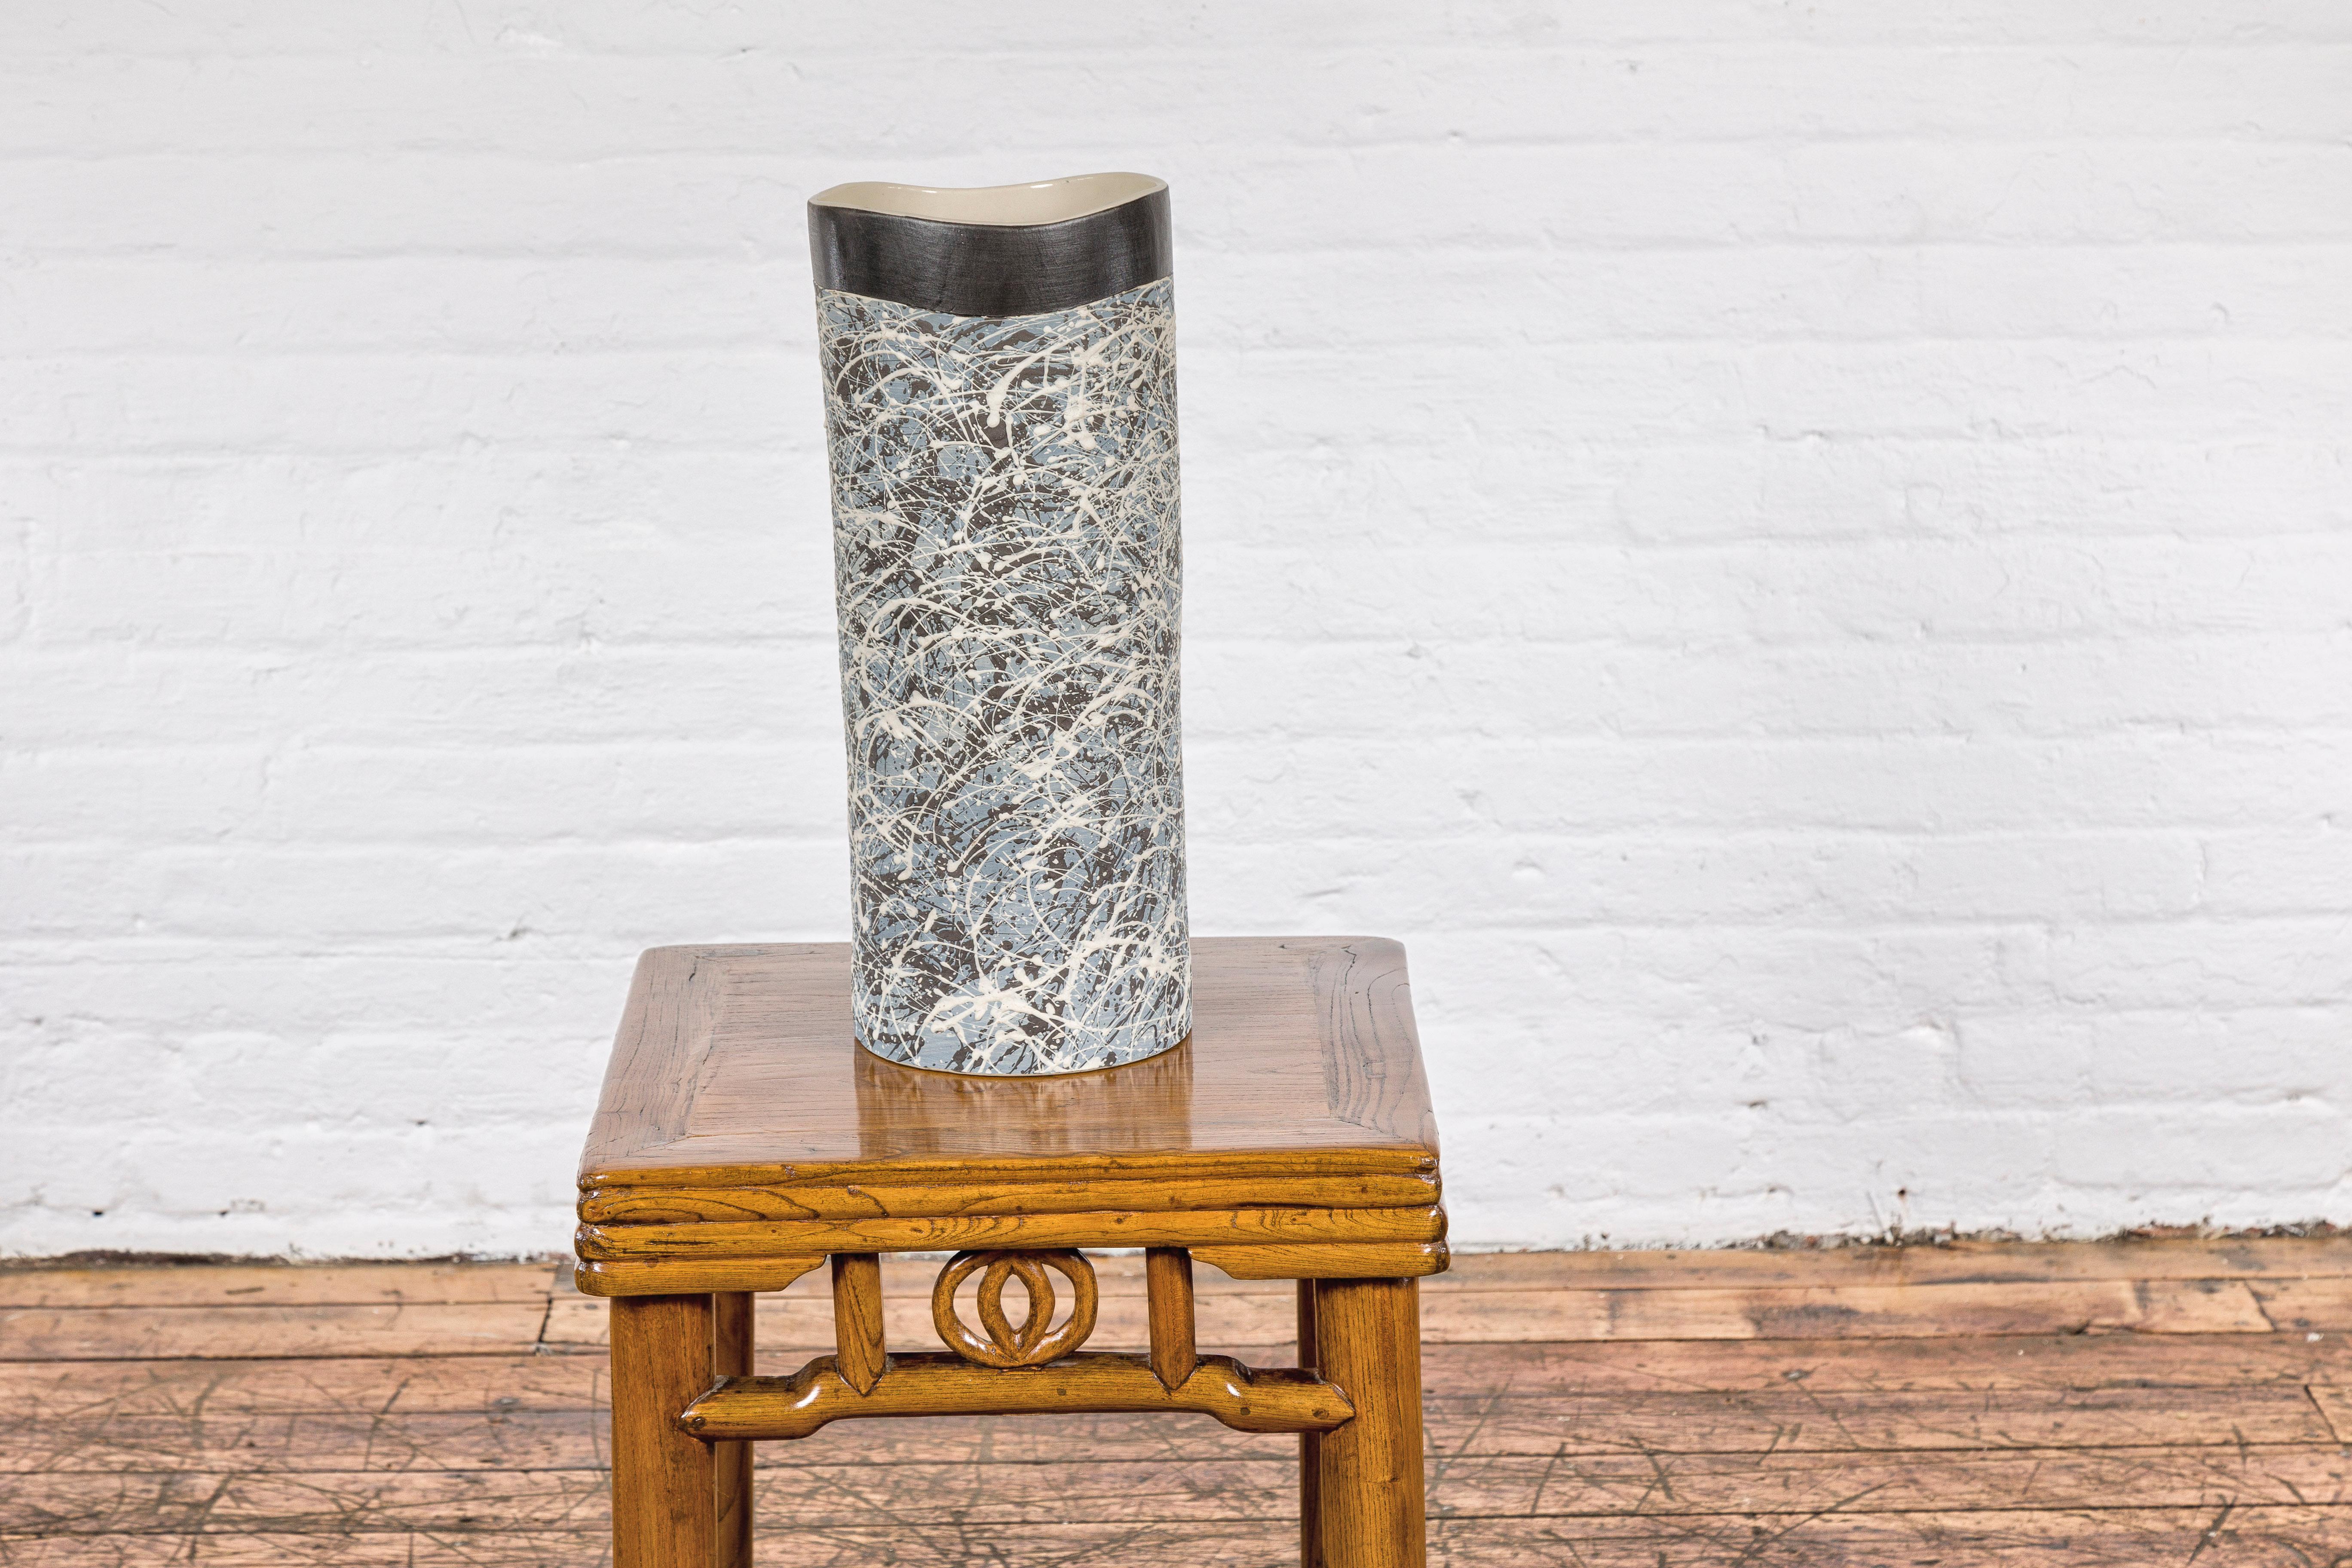 Contemporary Textured Blue Gray, White, Brown and Black Spattered Ceramic Vase For Sale